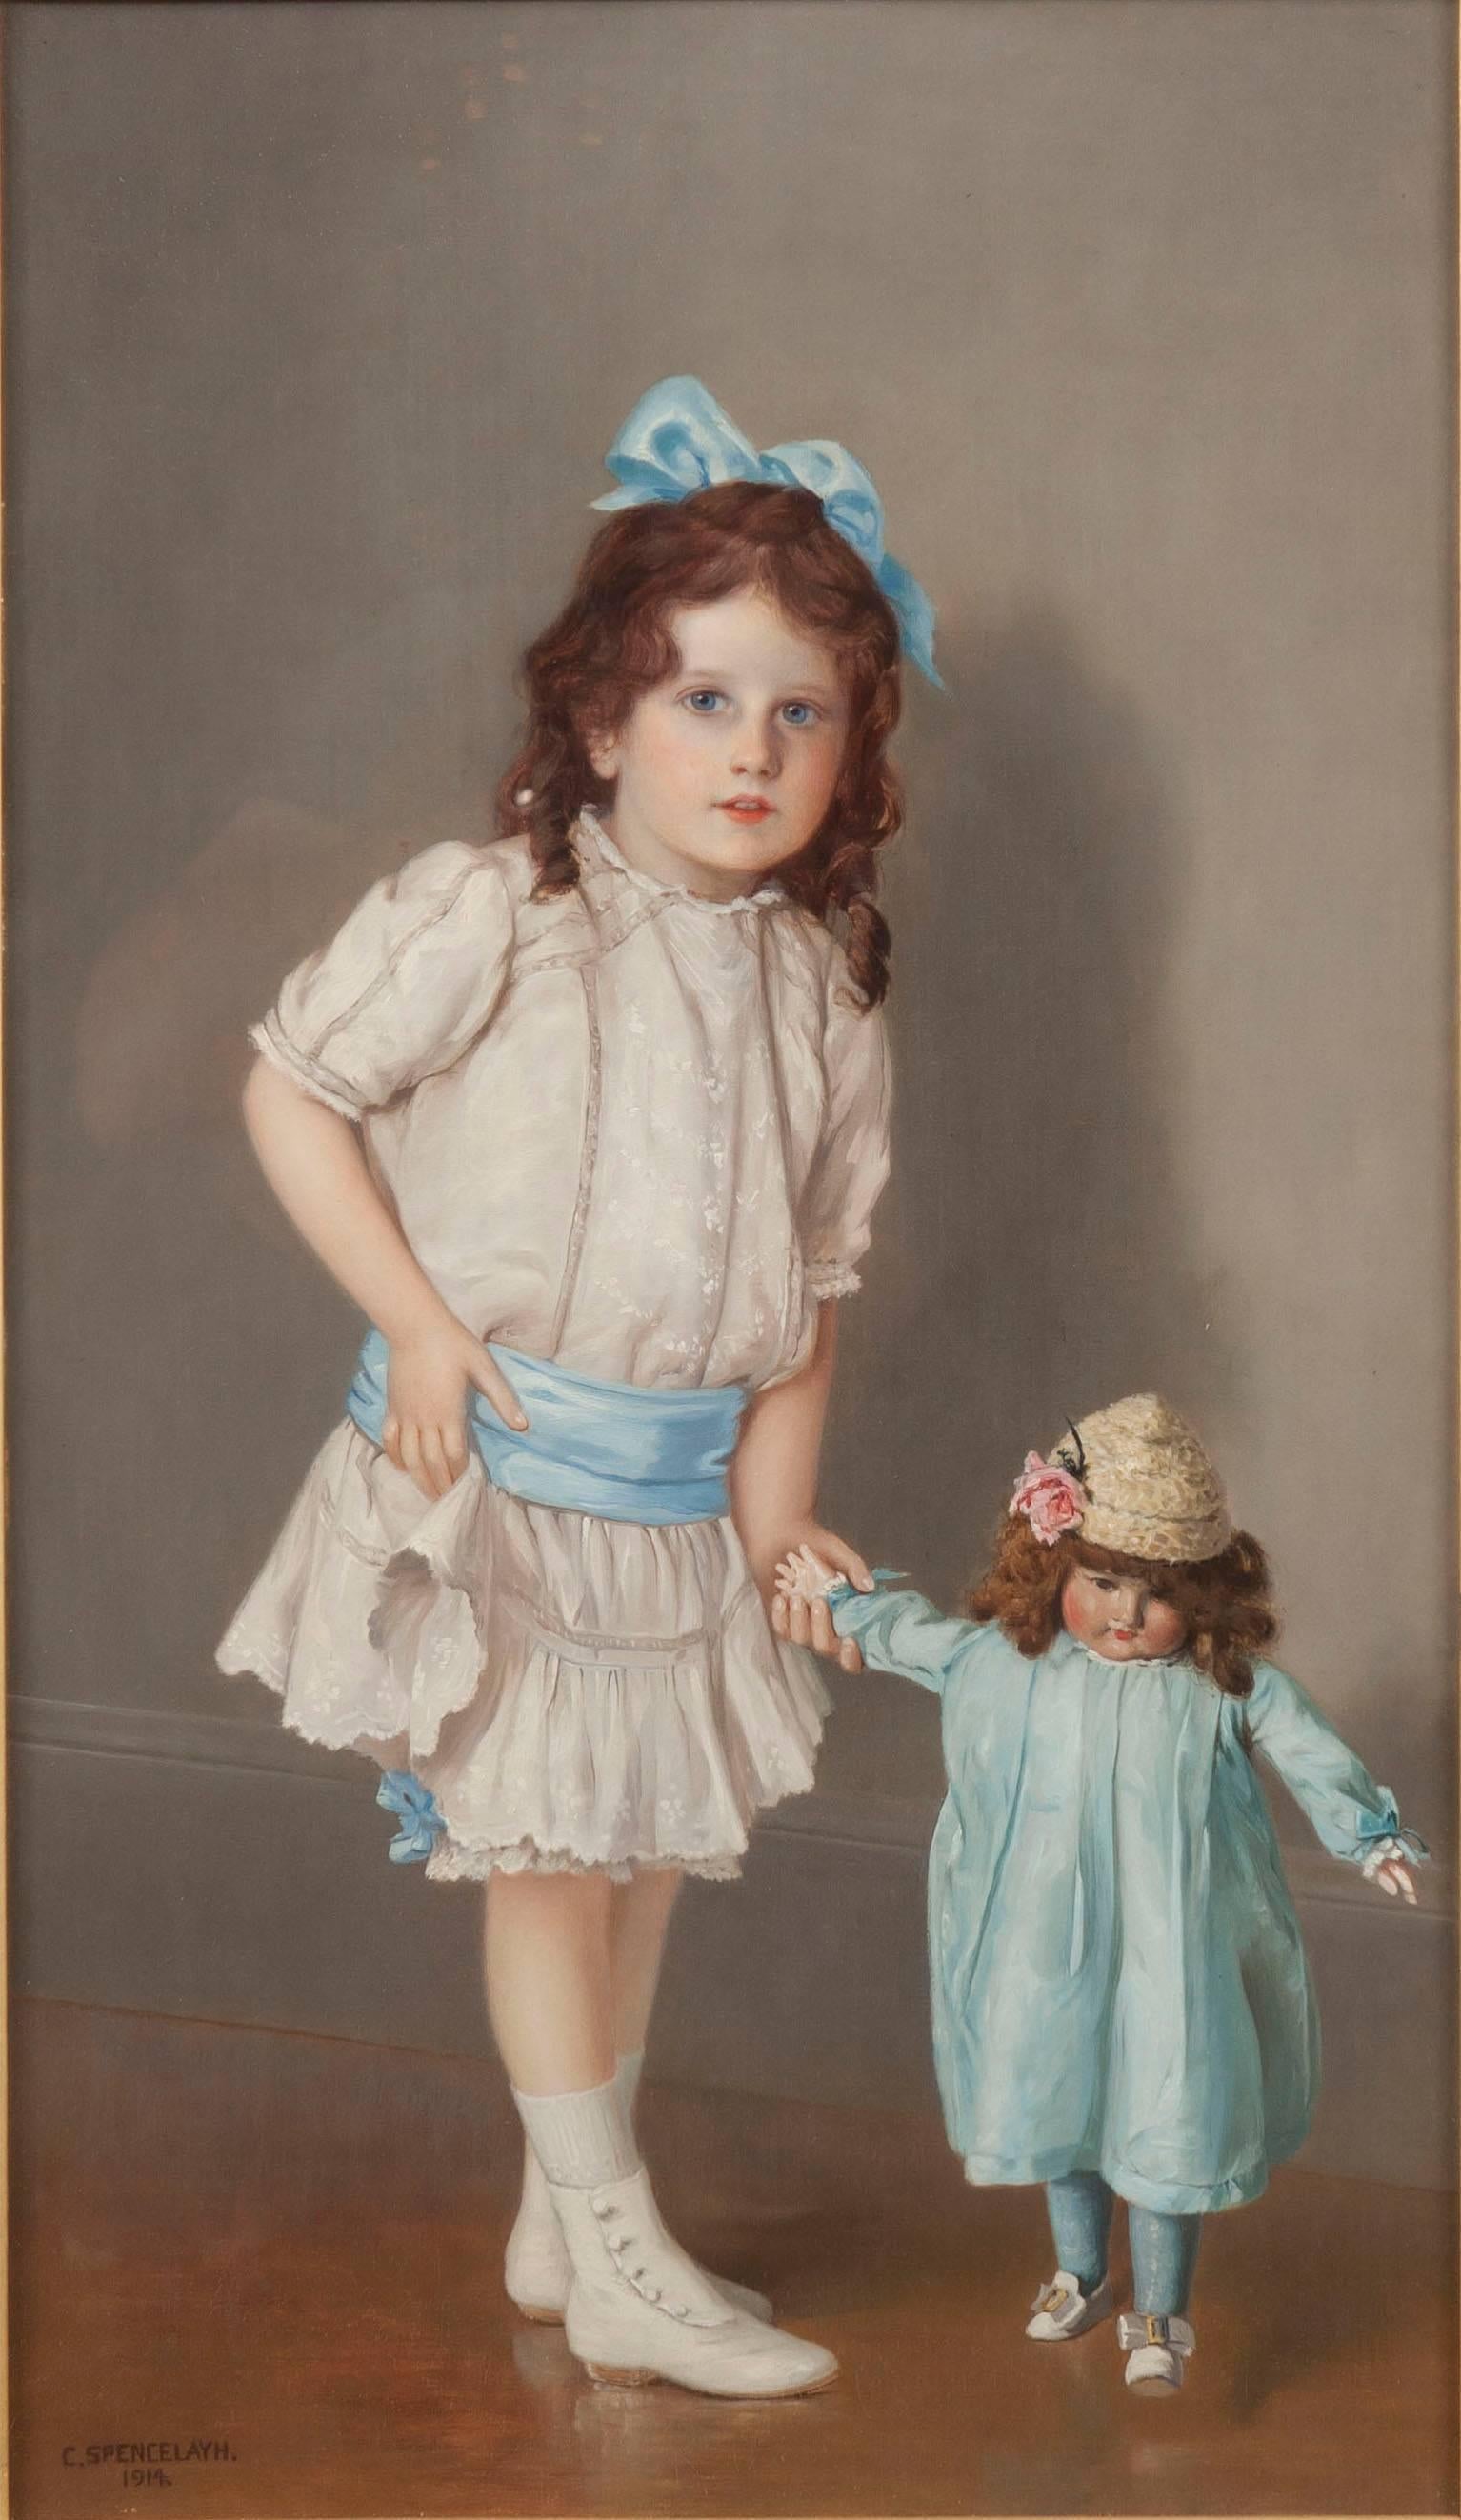 'Her First Steps' By Charles Spencelayh

Oil on canvas, signed by the artist and dated 1914. Depicting a young girl in a pale pink dress with a blue sash and bow in her hair. She walks a young doll in a blue outfit with a straw hat.

Sight size: